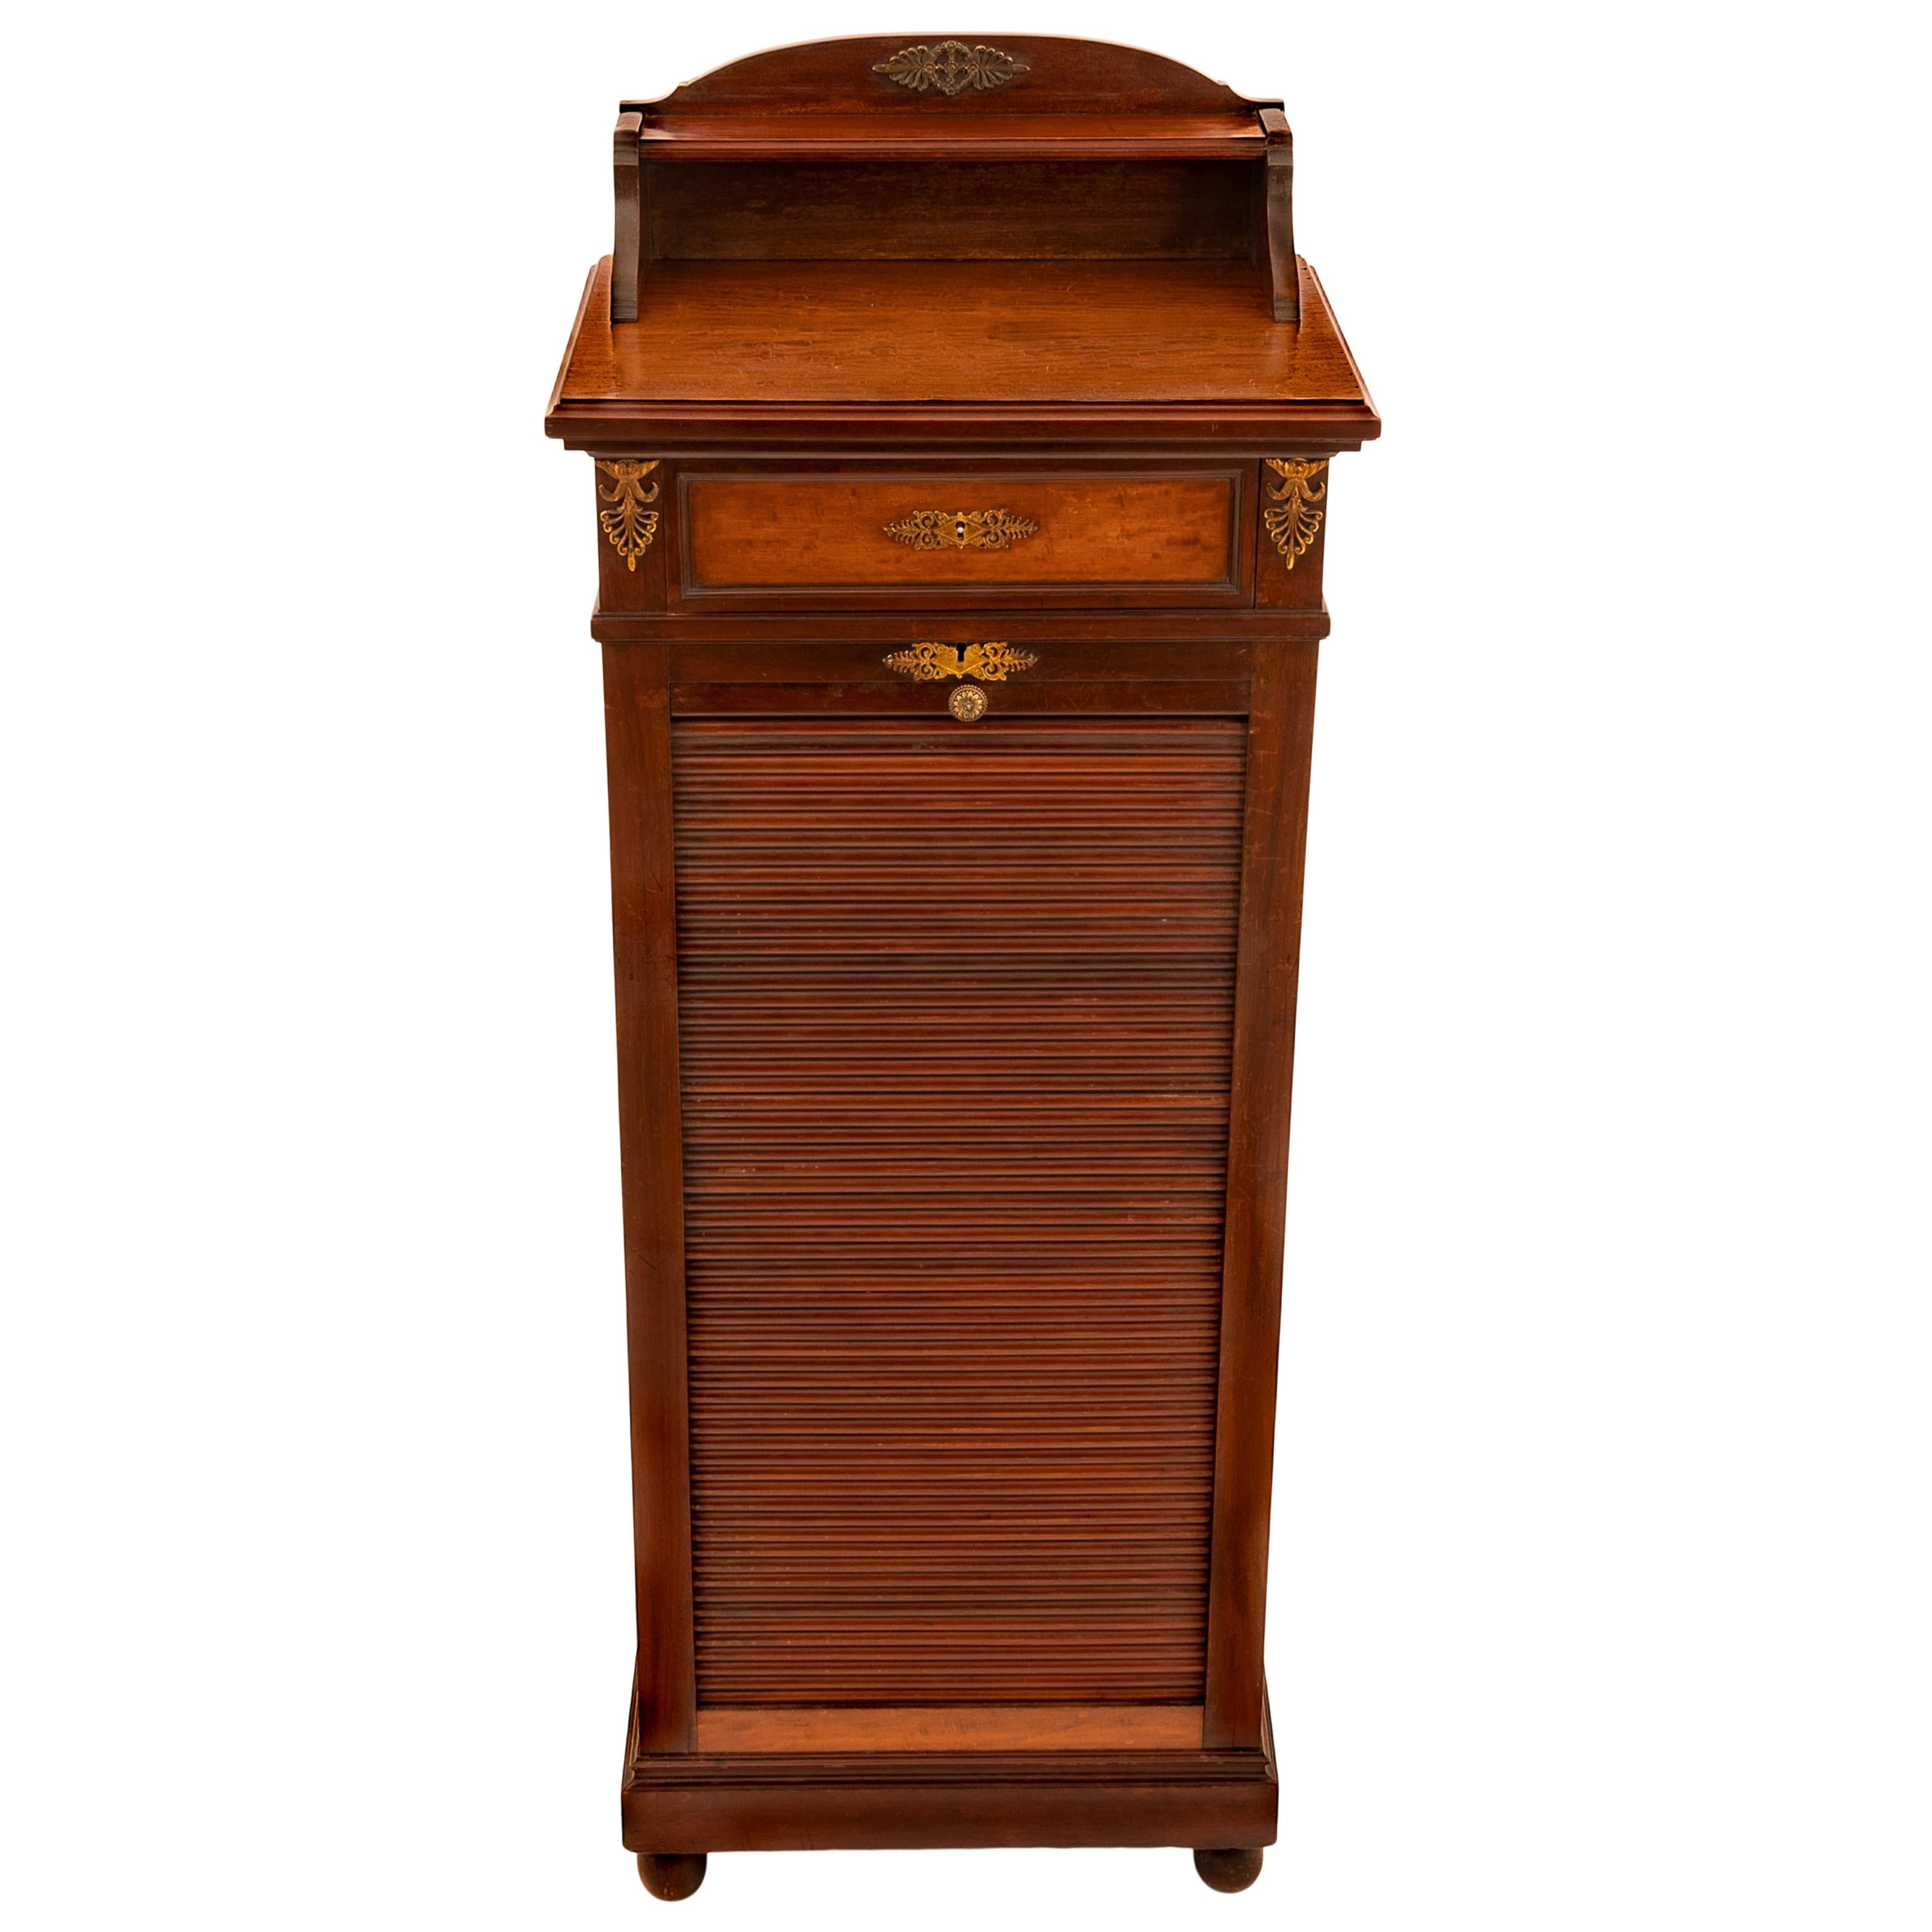 Early 20th Century Antique French Louis XV Walnut Ormolu Tambour Roll Top File Cabinet Paris 1900